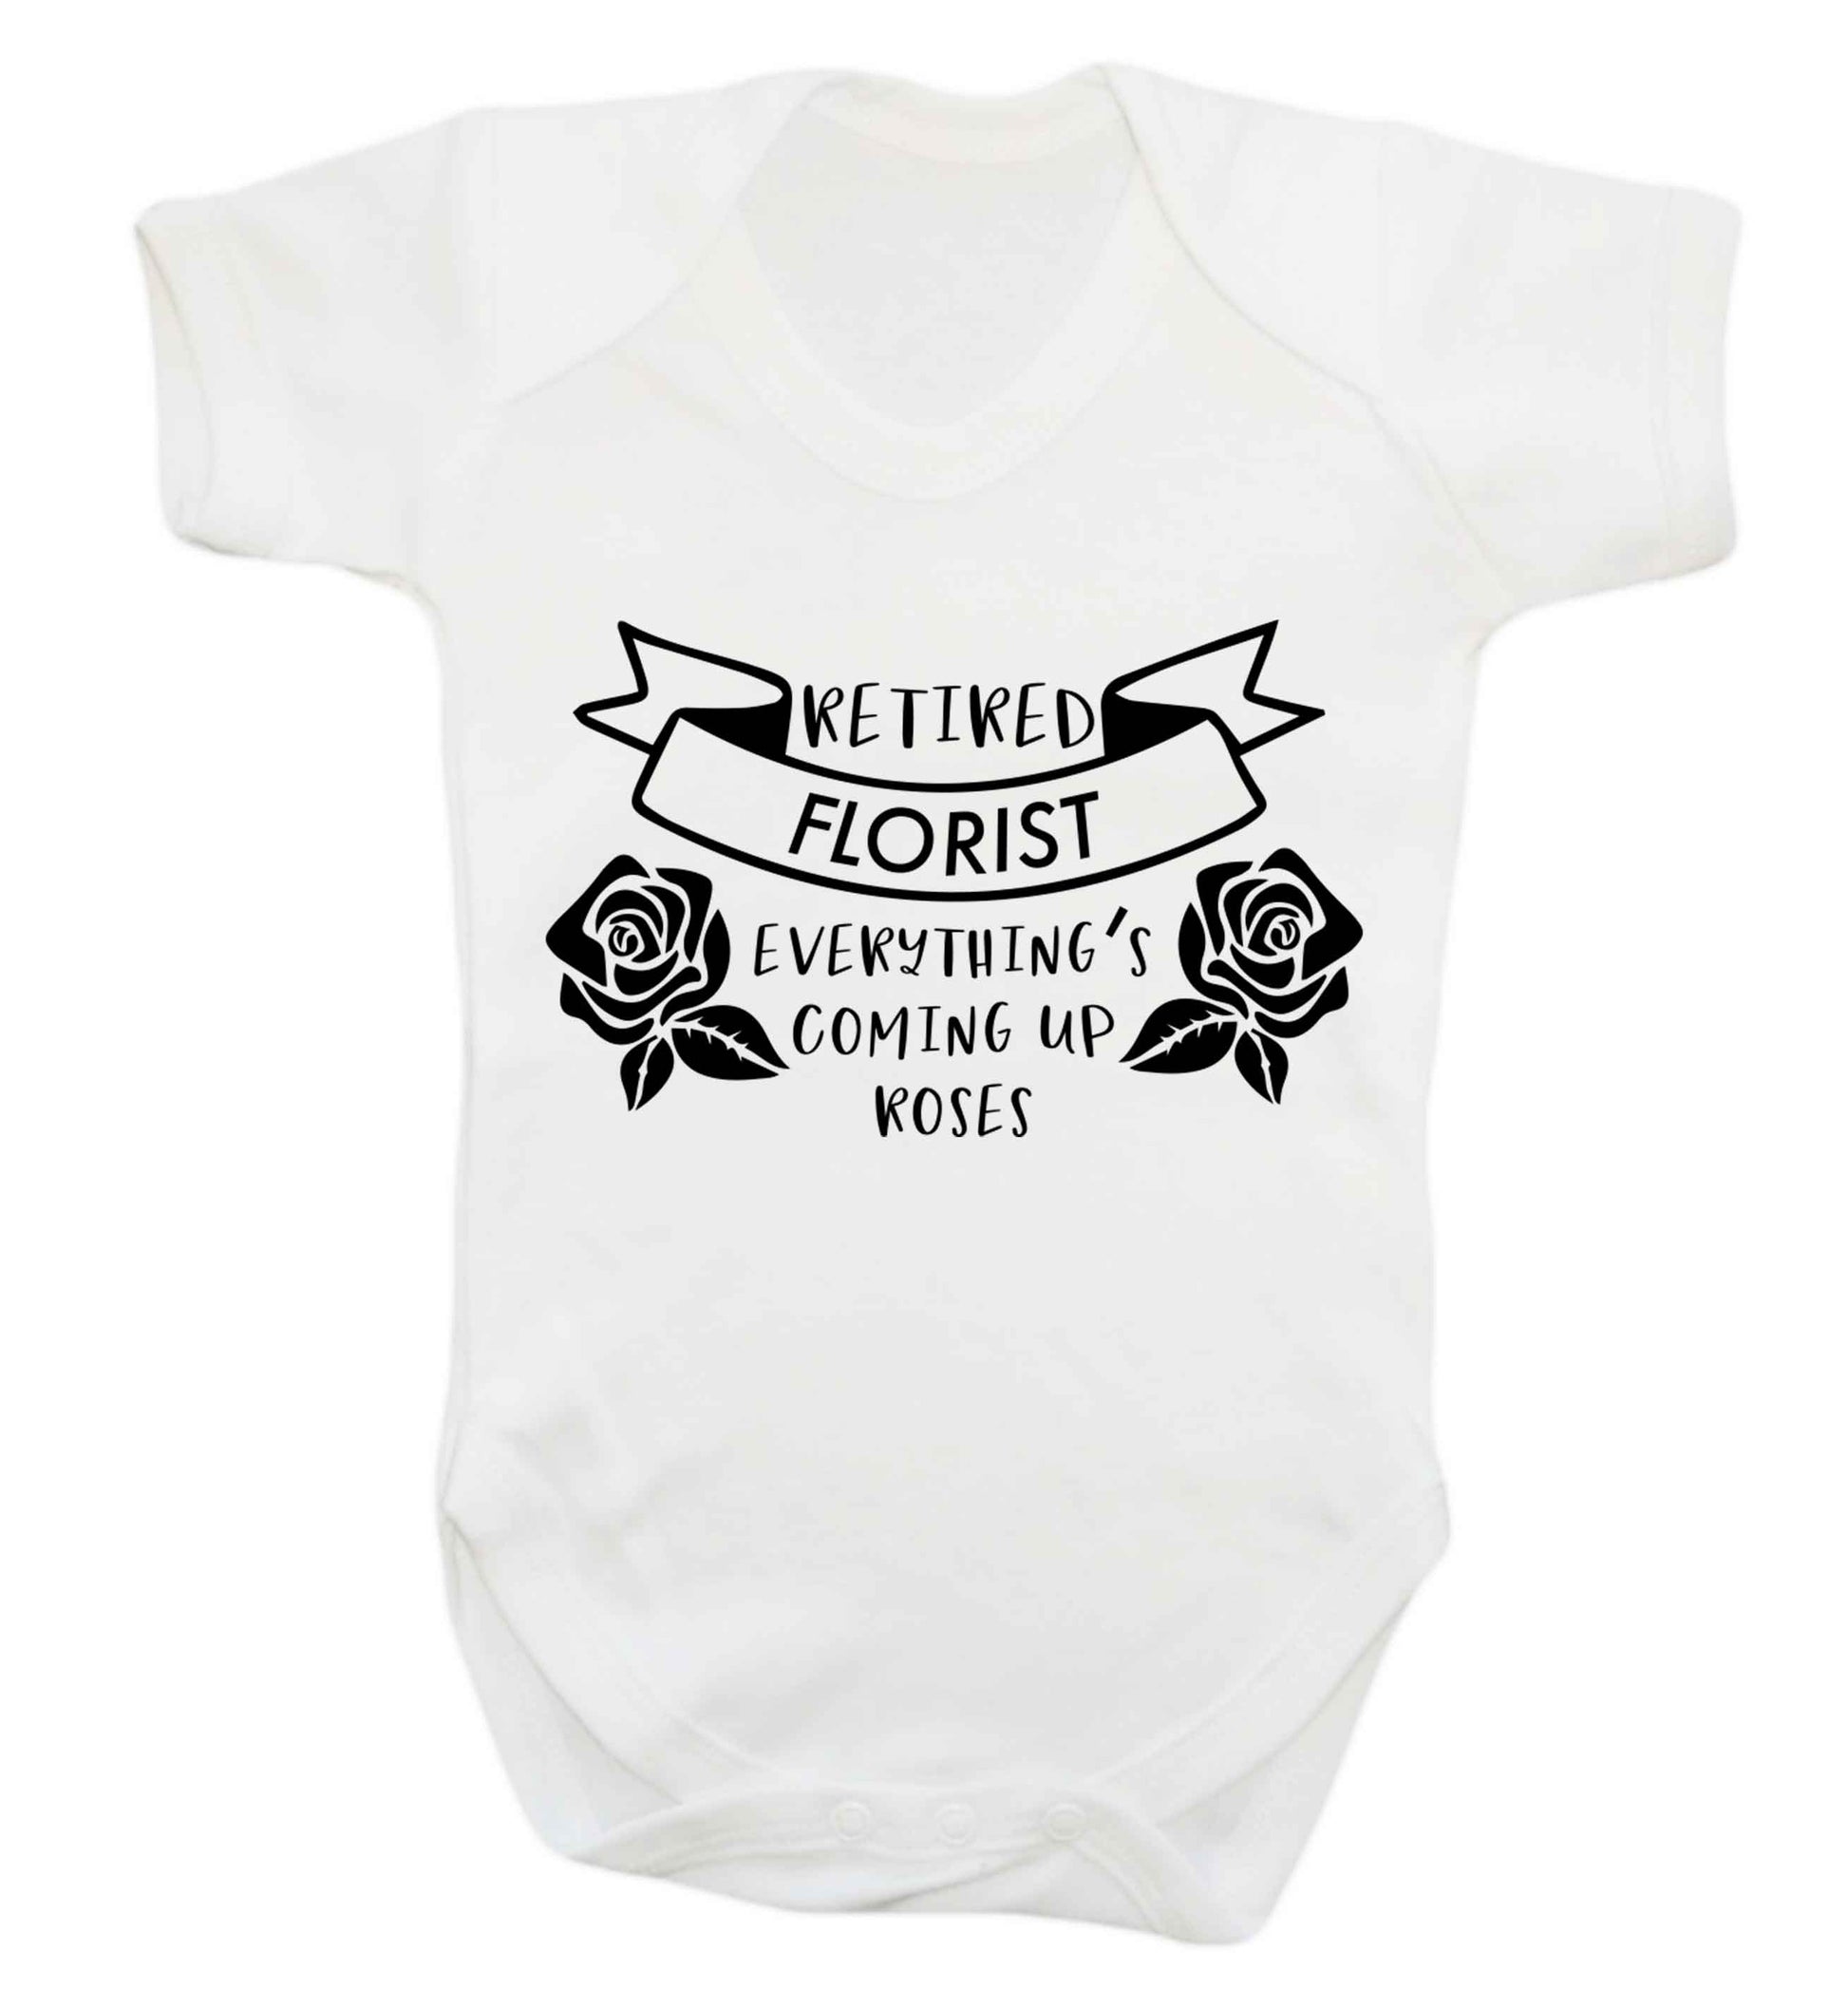 Retired florist everything's coming up roses Baby Vest white 18-24 months